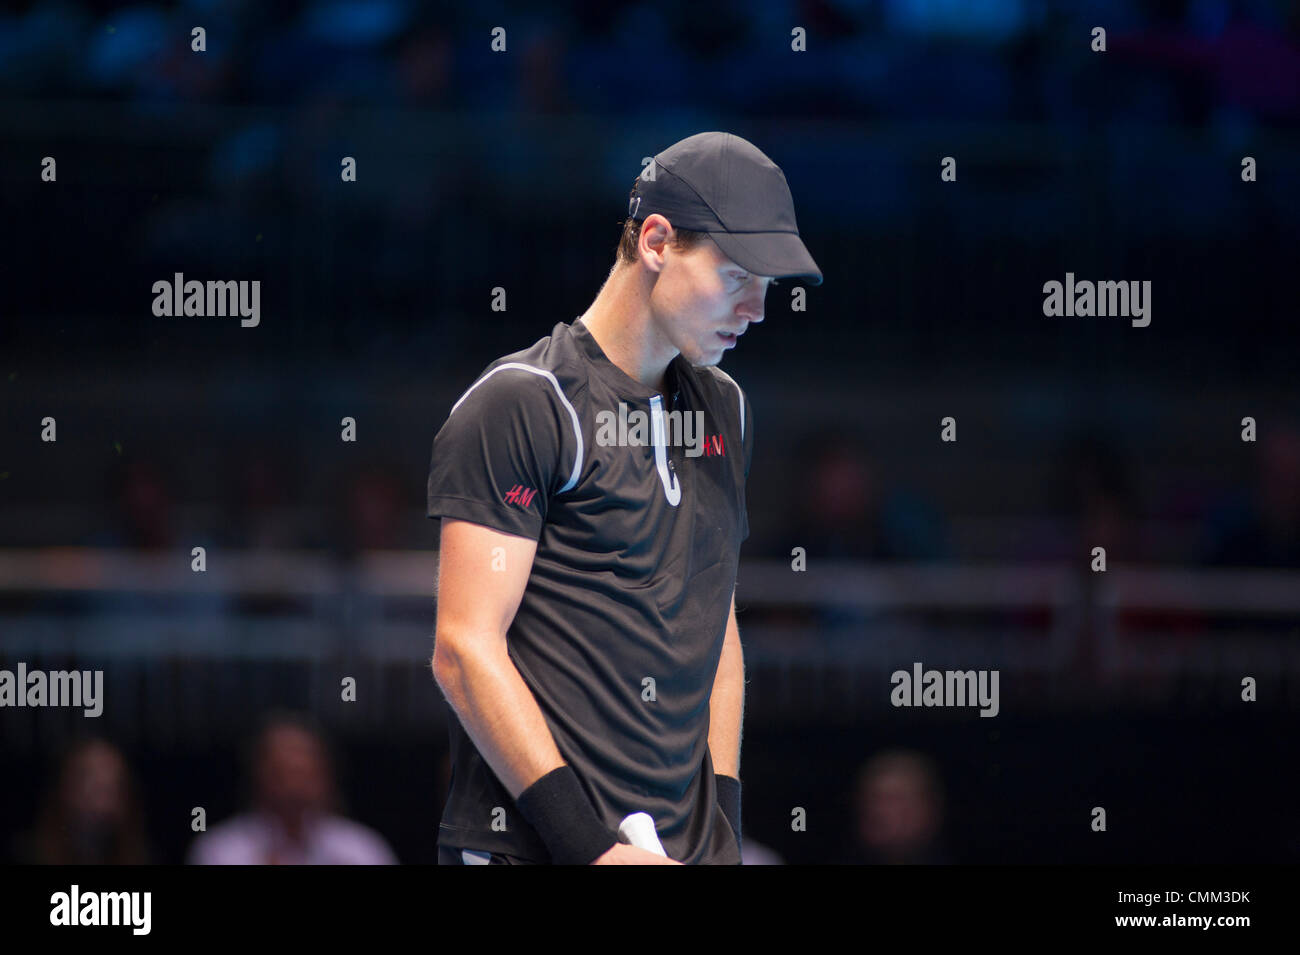 London, UK. 4th Nov, 2013. Group A Singles Competition, Tomas Berdych (CZE) seen here during the match with Stanislas Wawrinka (SUI) at the Barclays ATP World Tour Finals Credit:  Malcolm Park editorial/Alamy Live News Stock Photo